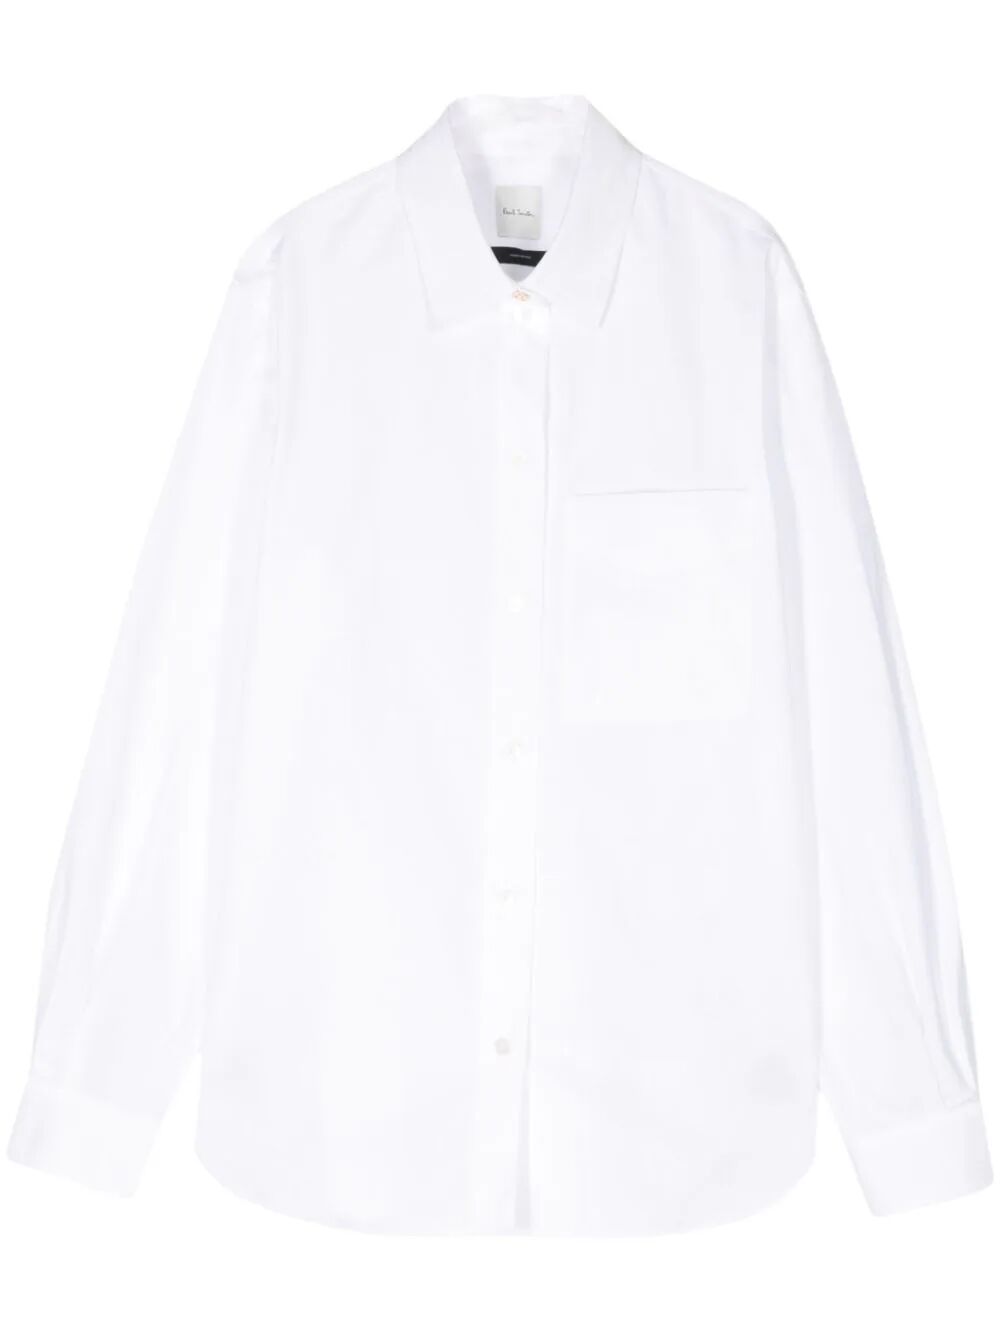 Paul Smith Classic Shirt In White